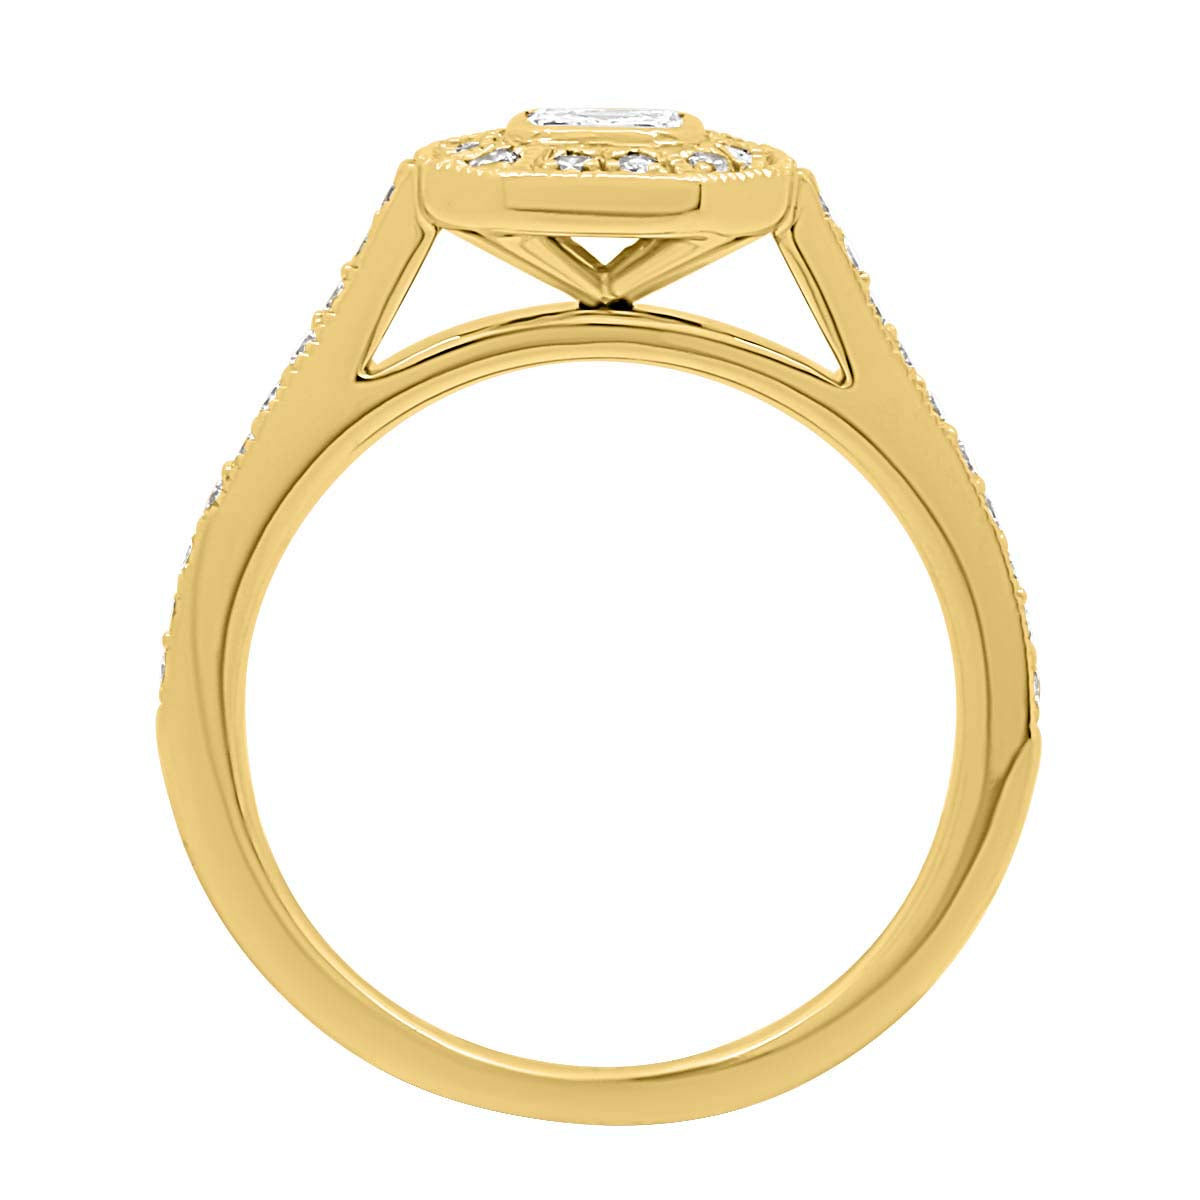 Vintage Design Ring in yellow gold viewed upright